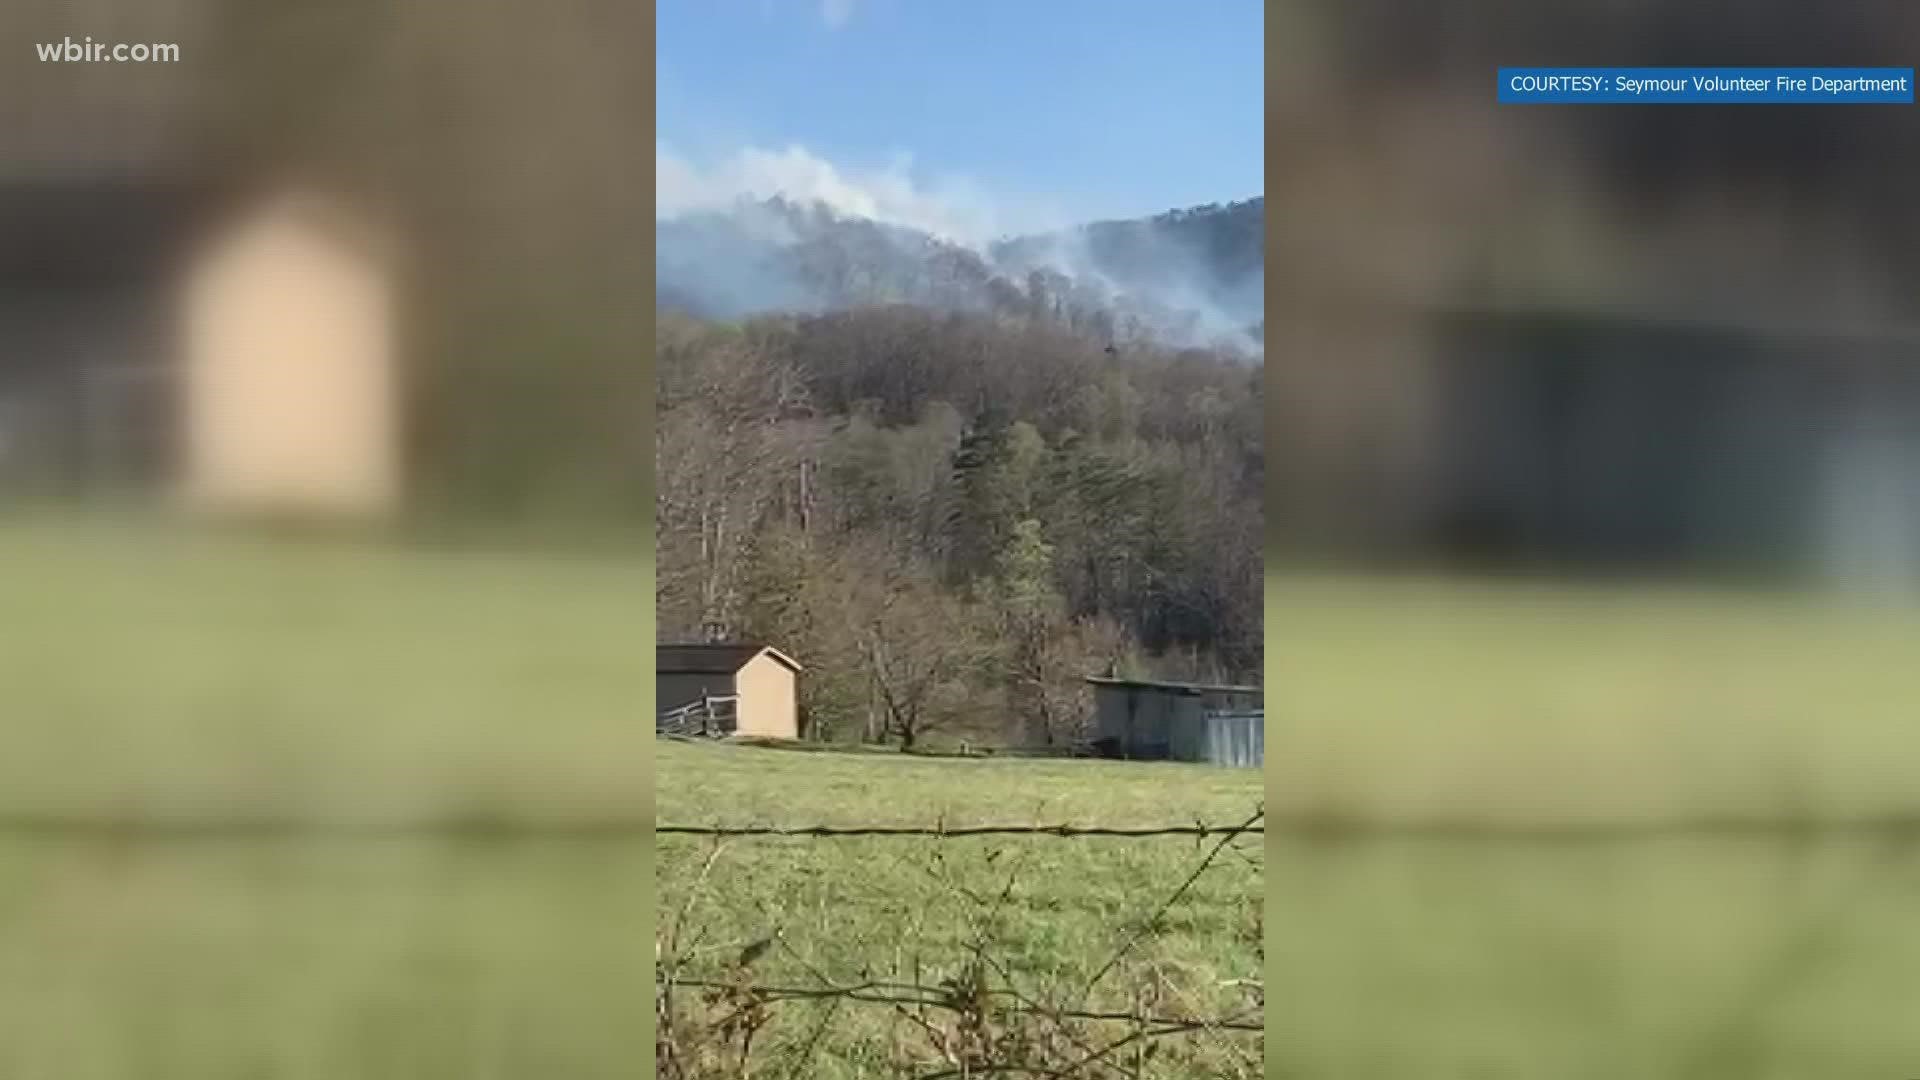 The fire is roughly 800 acres in size and was located near Millstone Gap Road close to the Blount-Sevier County line.